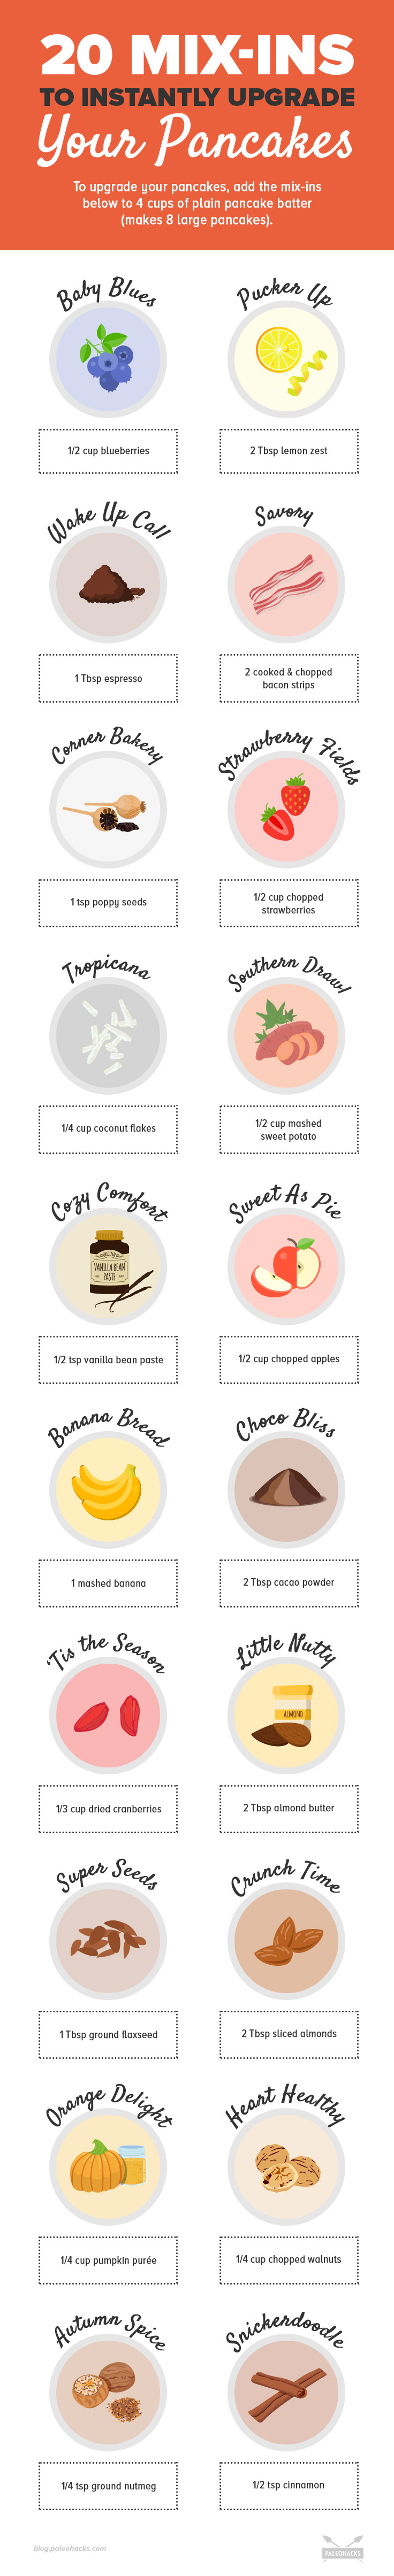 Jazz up your coconut flour pancakes with one (or more!) of these easy, mouth-watering mix-ins. See below for more great mix-in ideas!